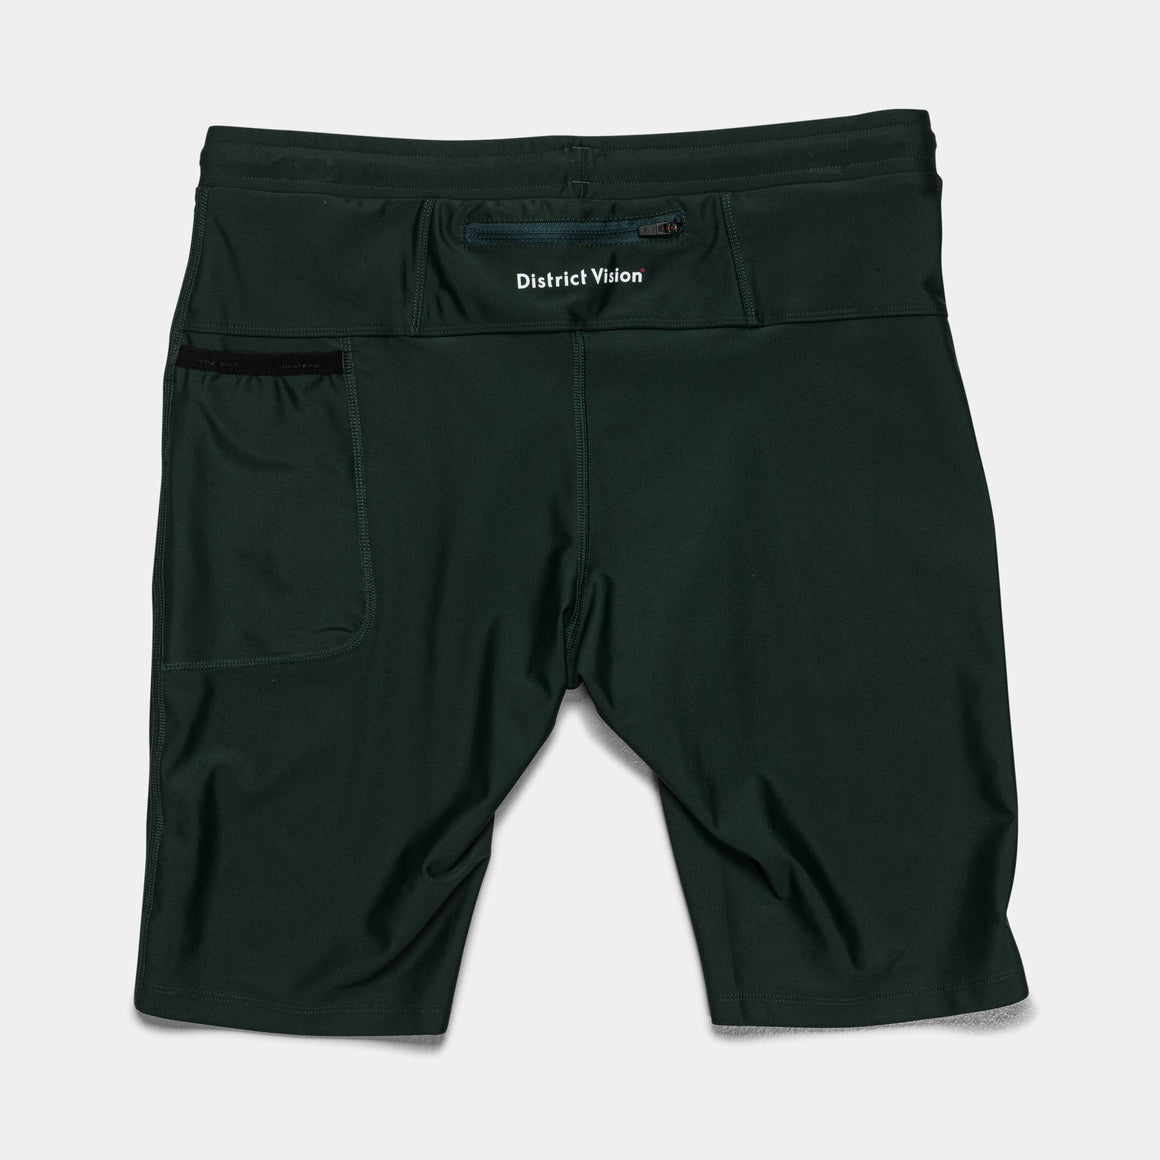 District Vision - Mens 9" Recycled Half Tights - Pine - Up There Athletics